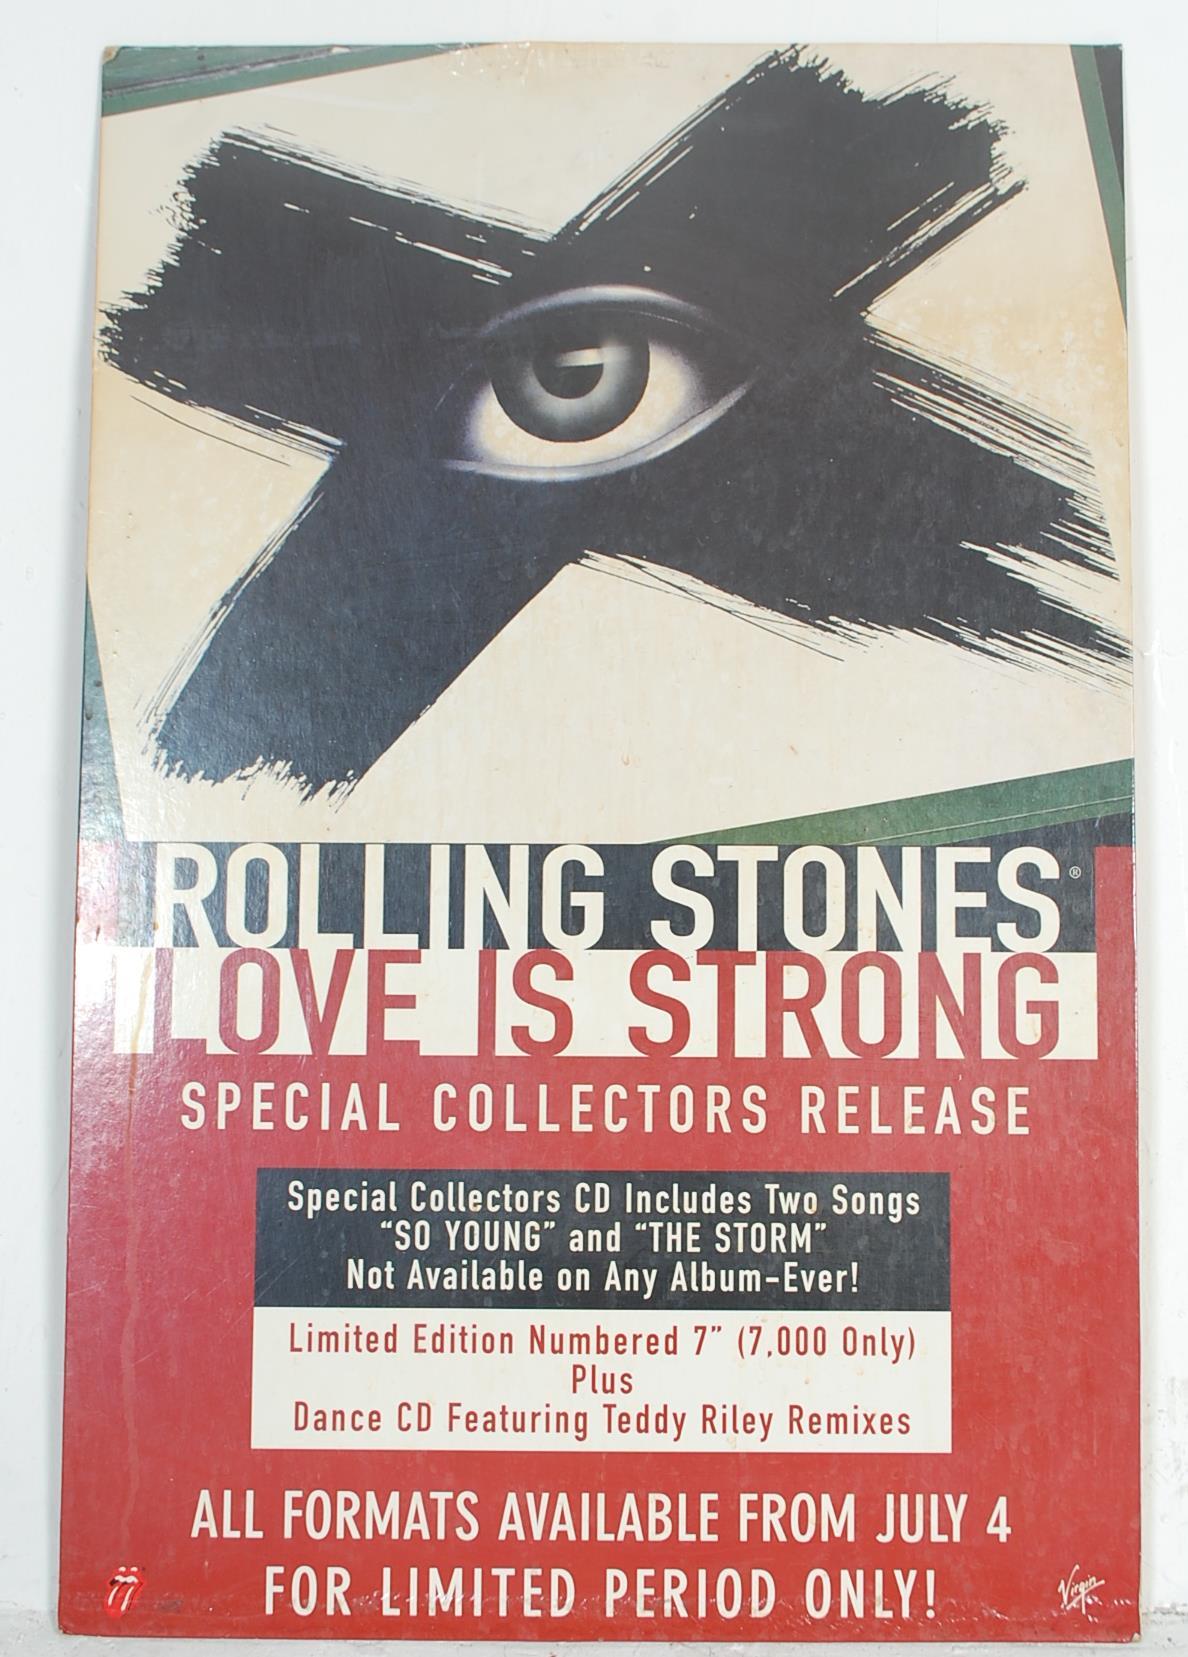 THE ROLLING STONES - ORIGINAL IN-STORE DISPLAY SIGNS - Image 3 of 5